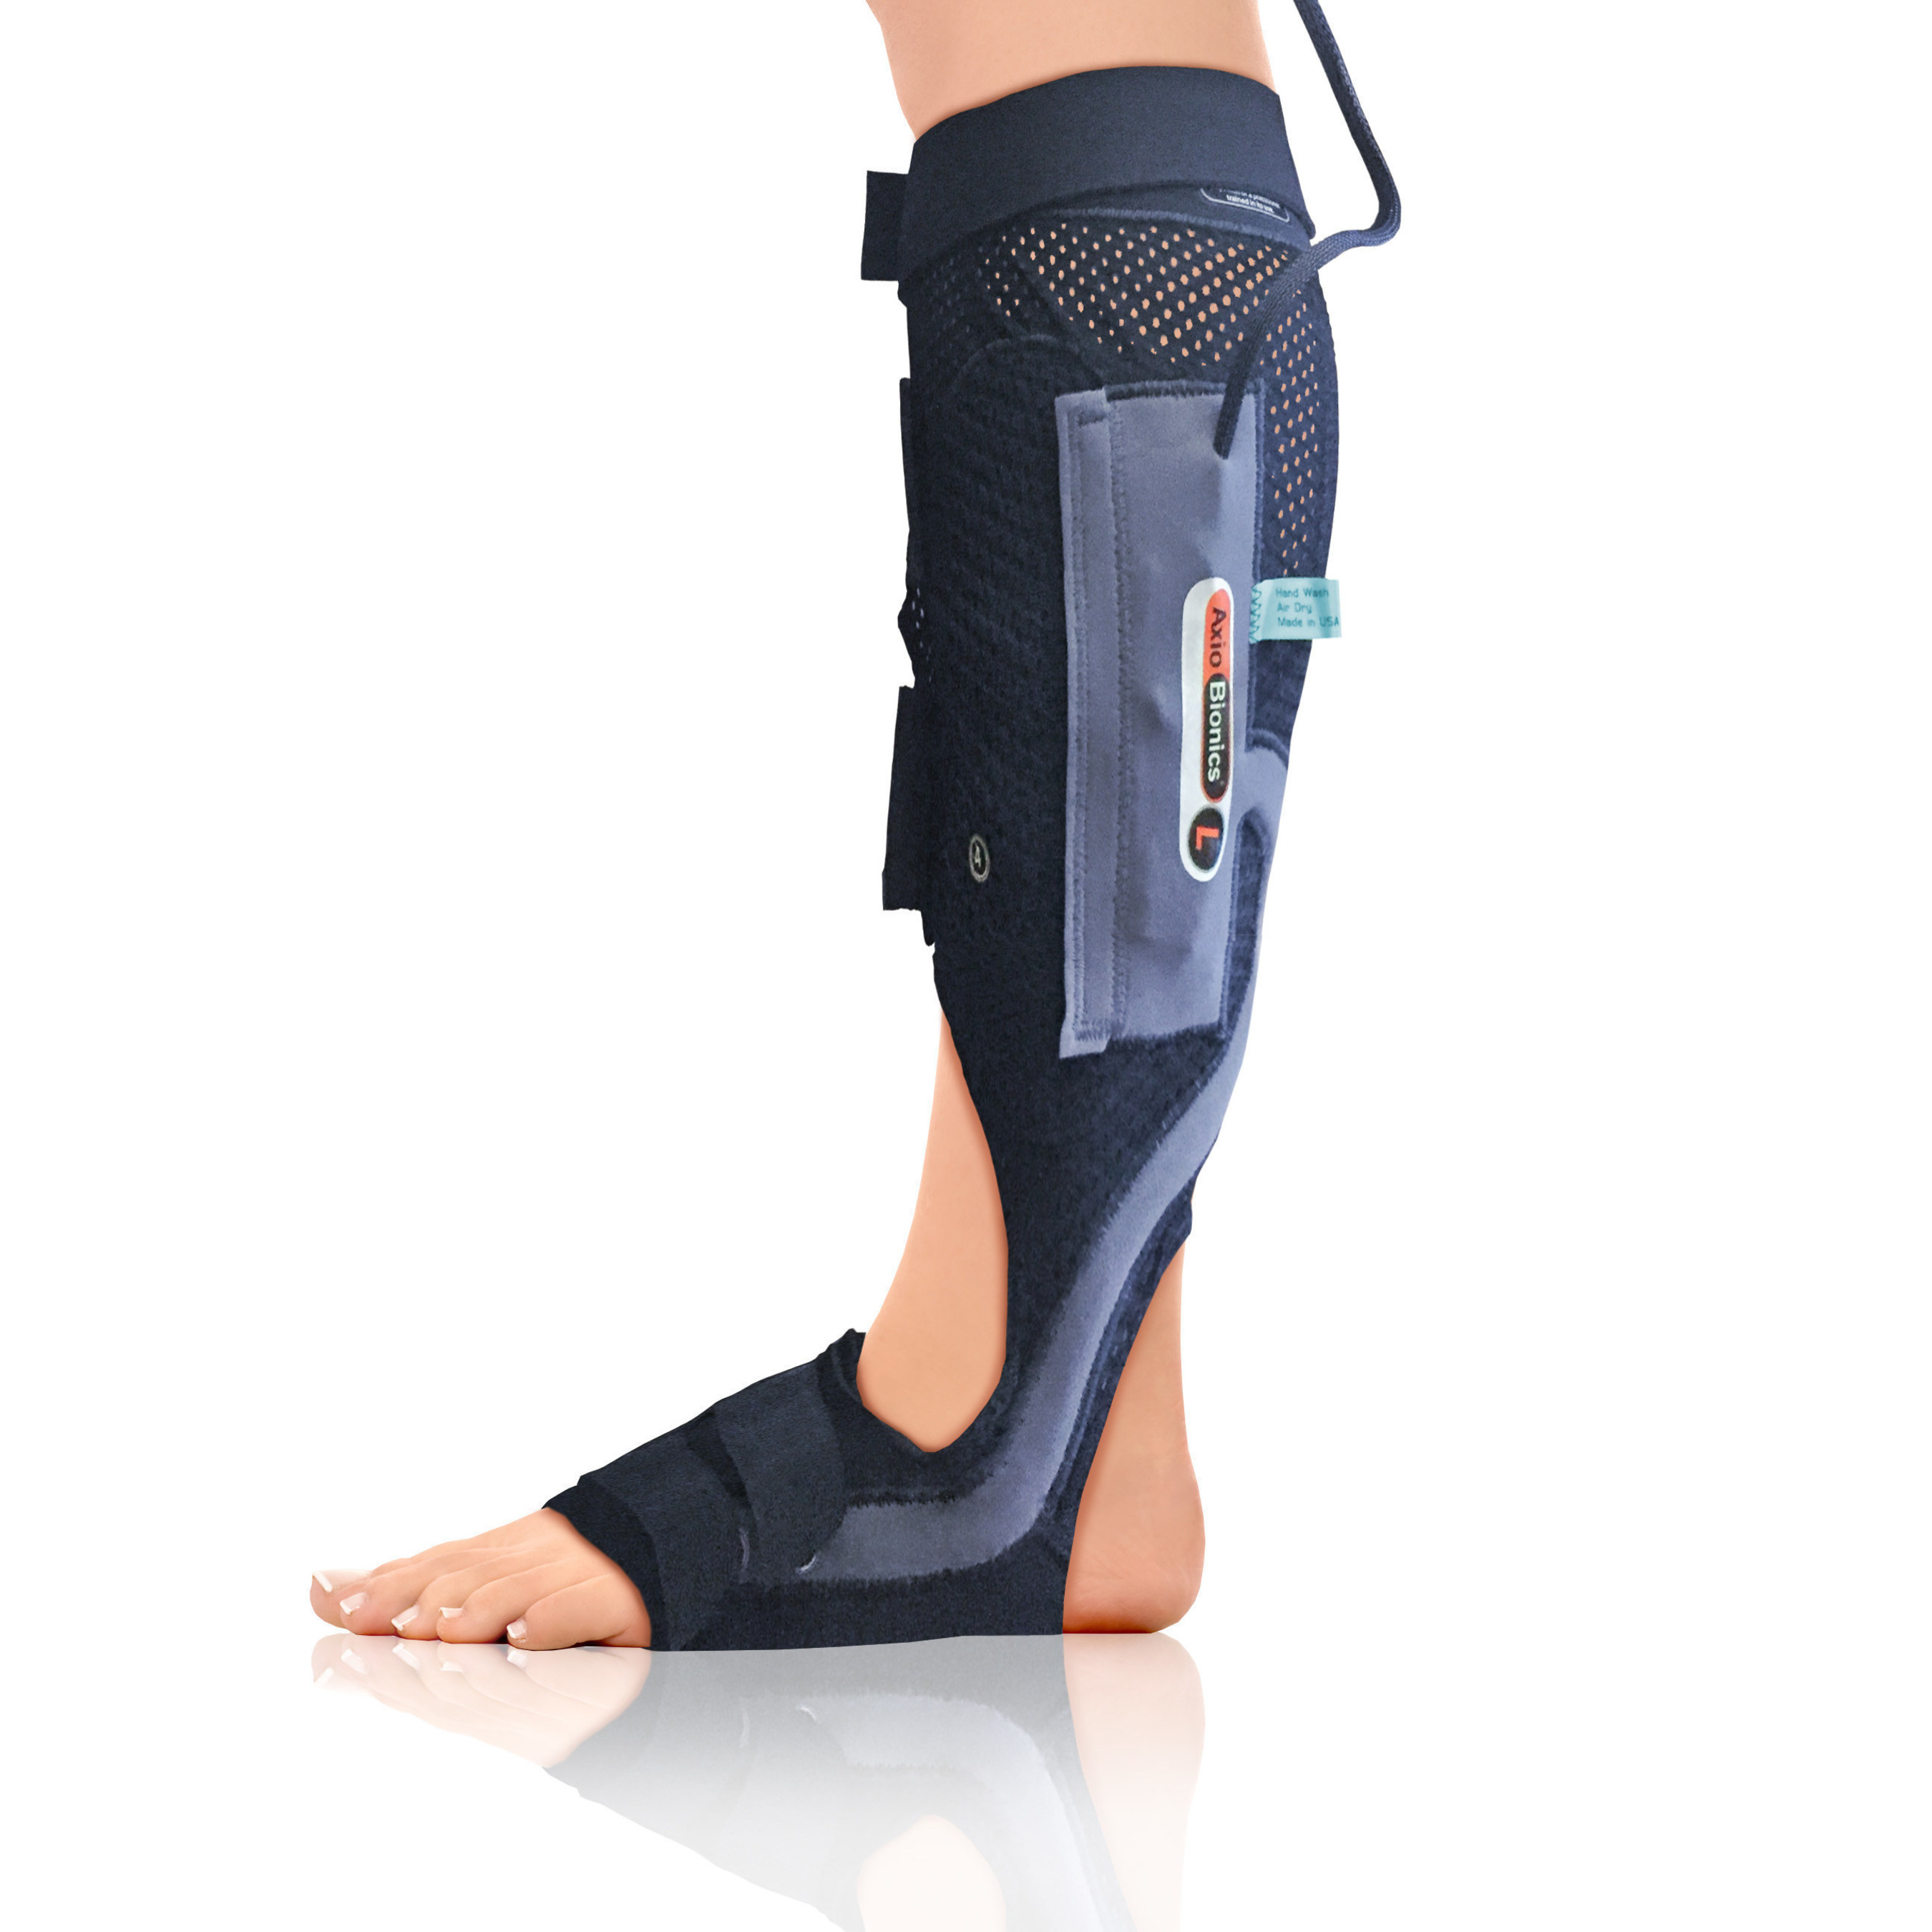 Sara was fit with the Wearable Therapy BioSleeve for the lower leg